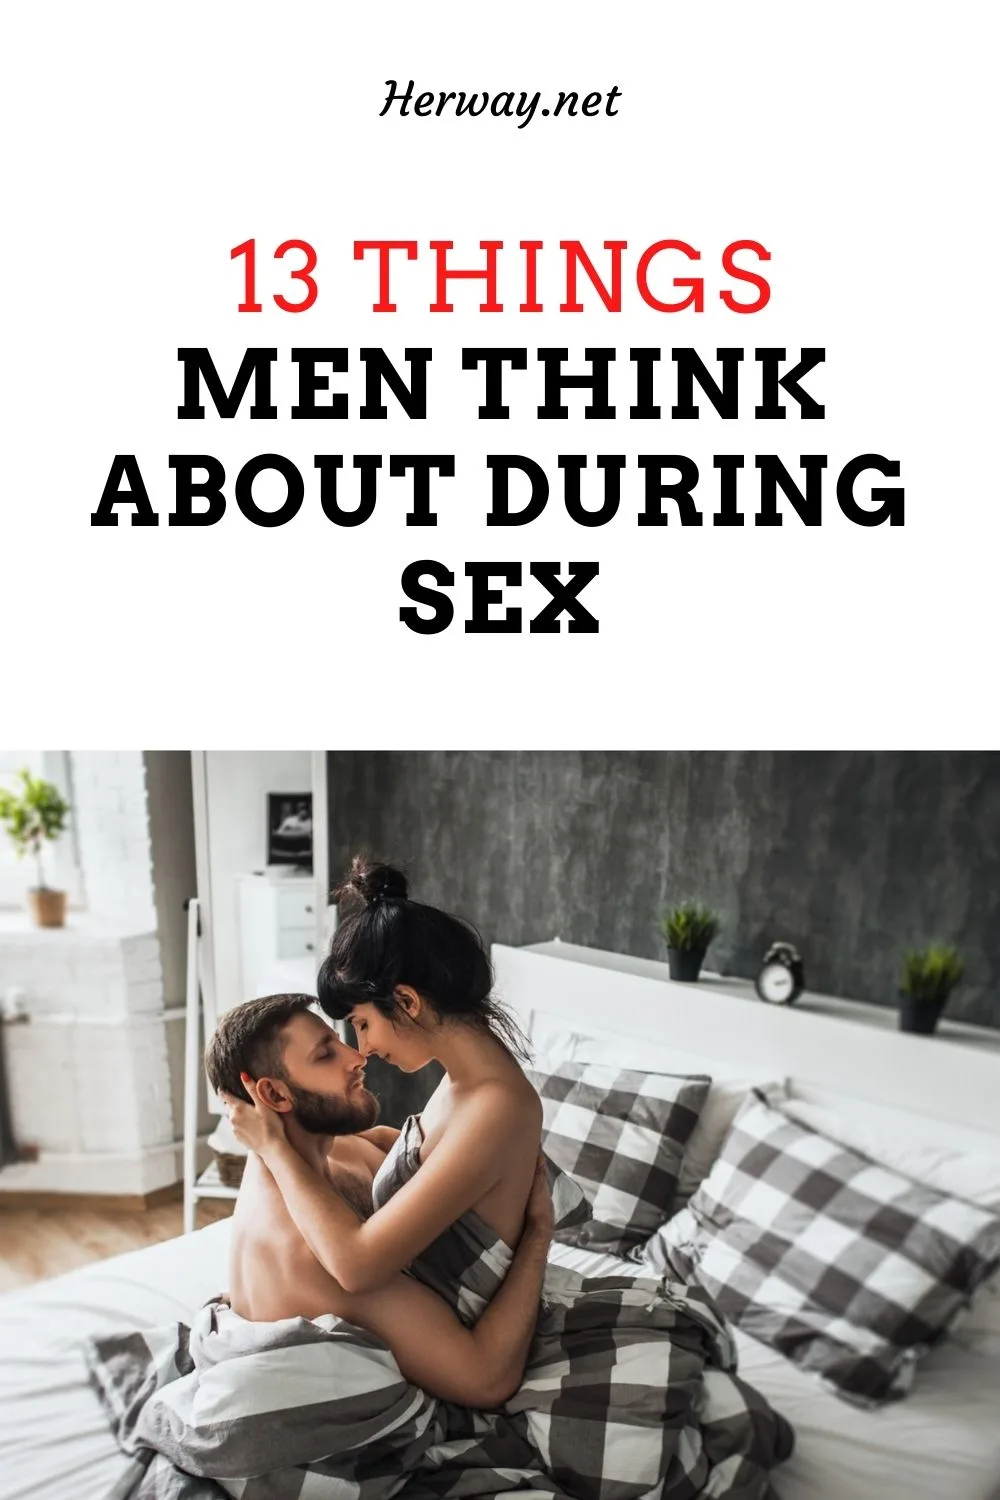 13 Things Men Think About During Sex